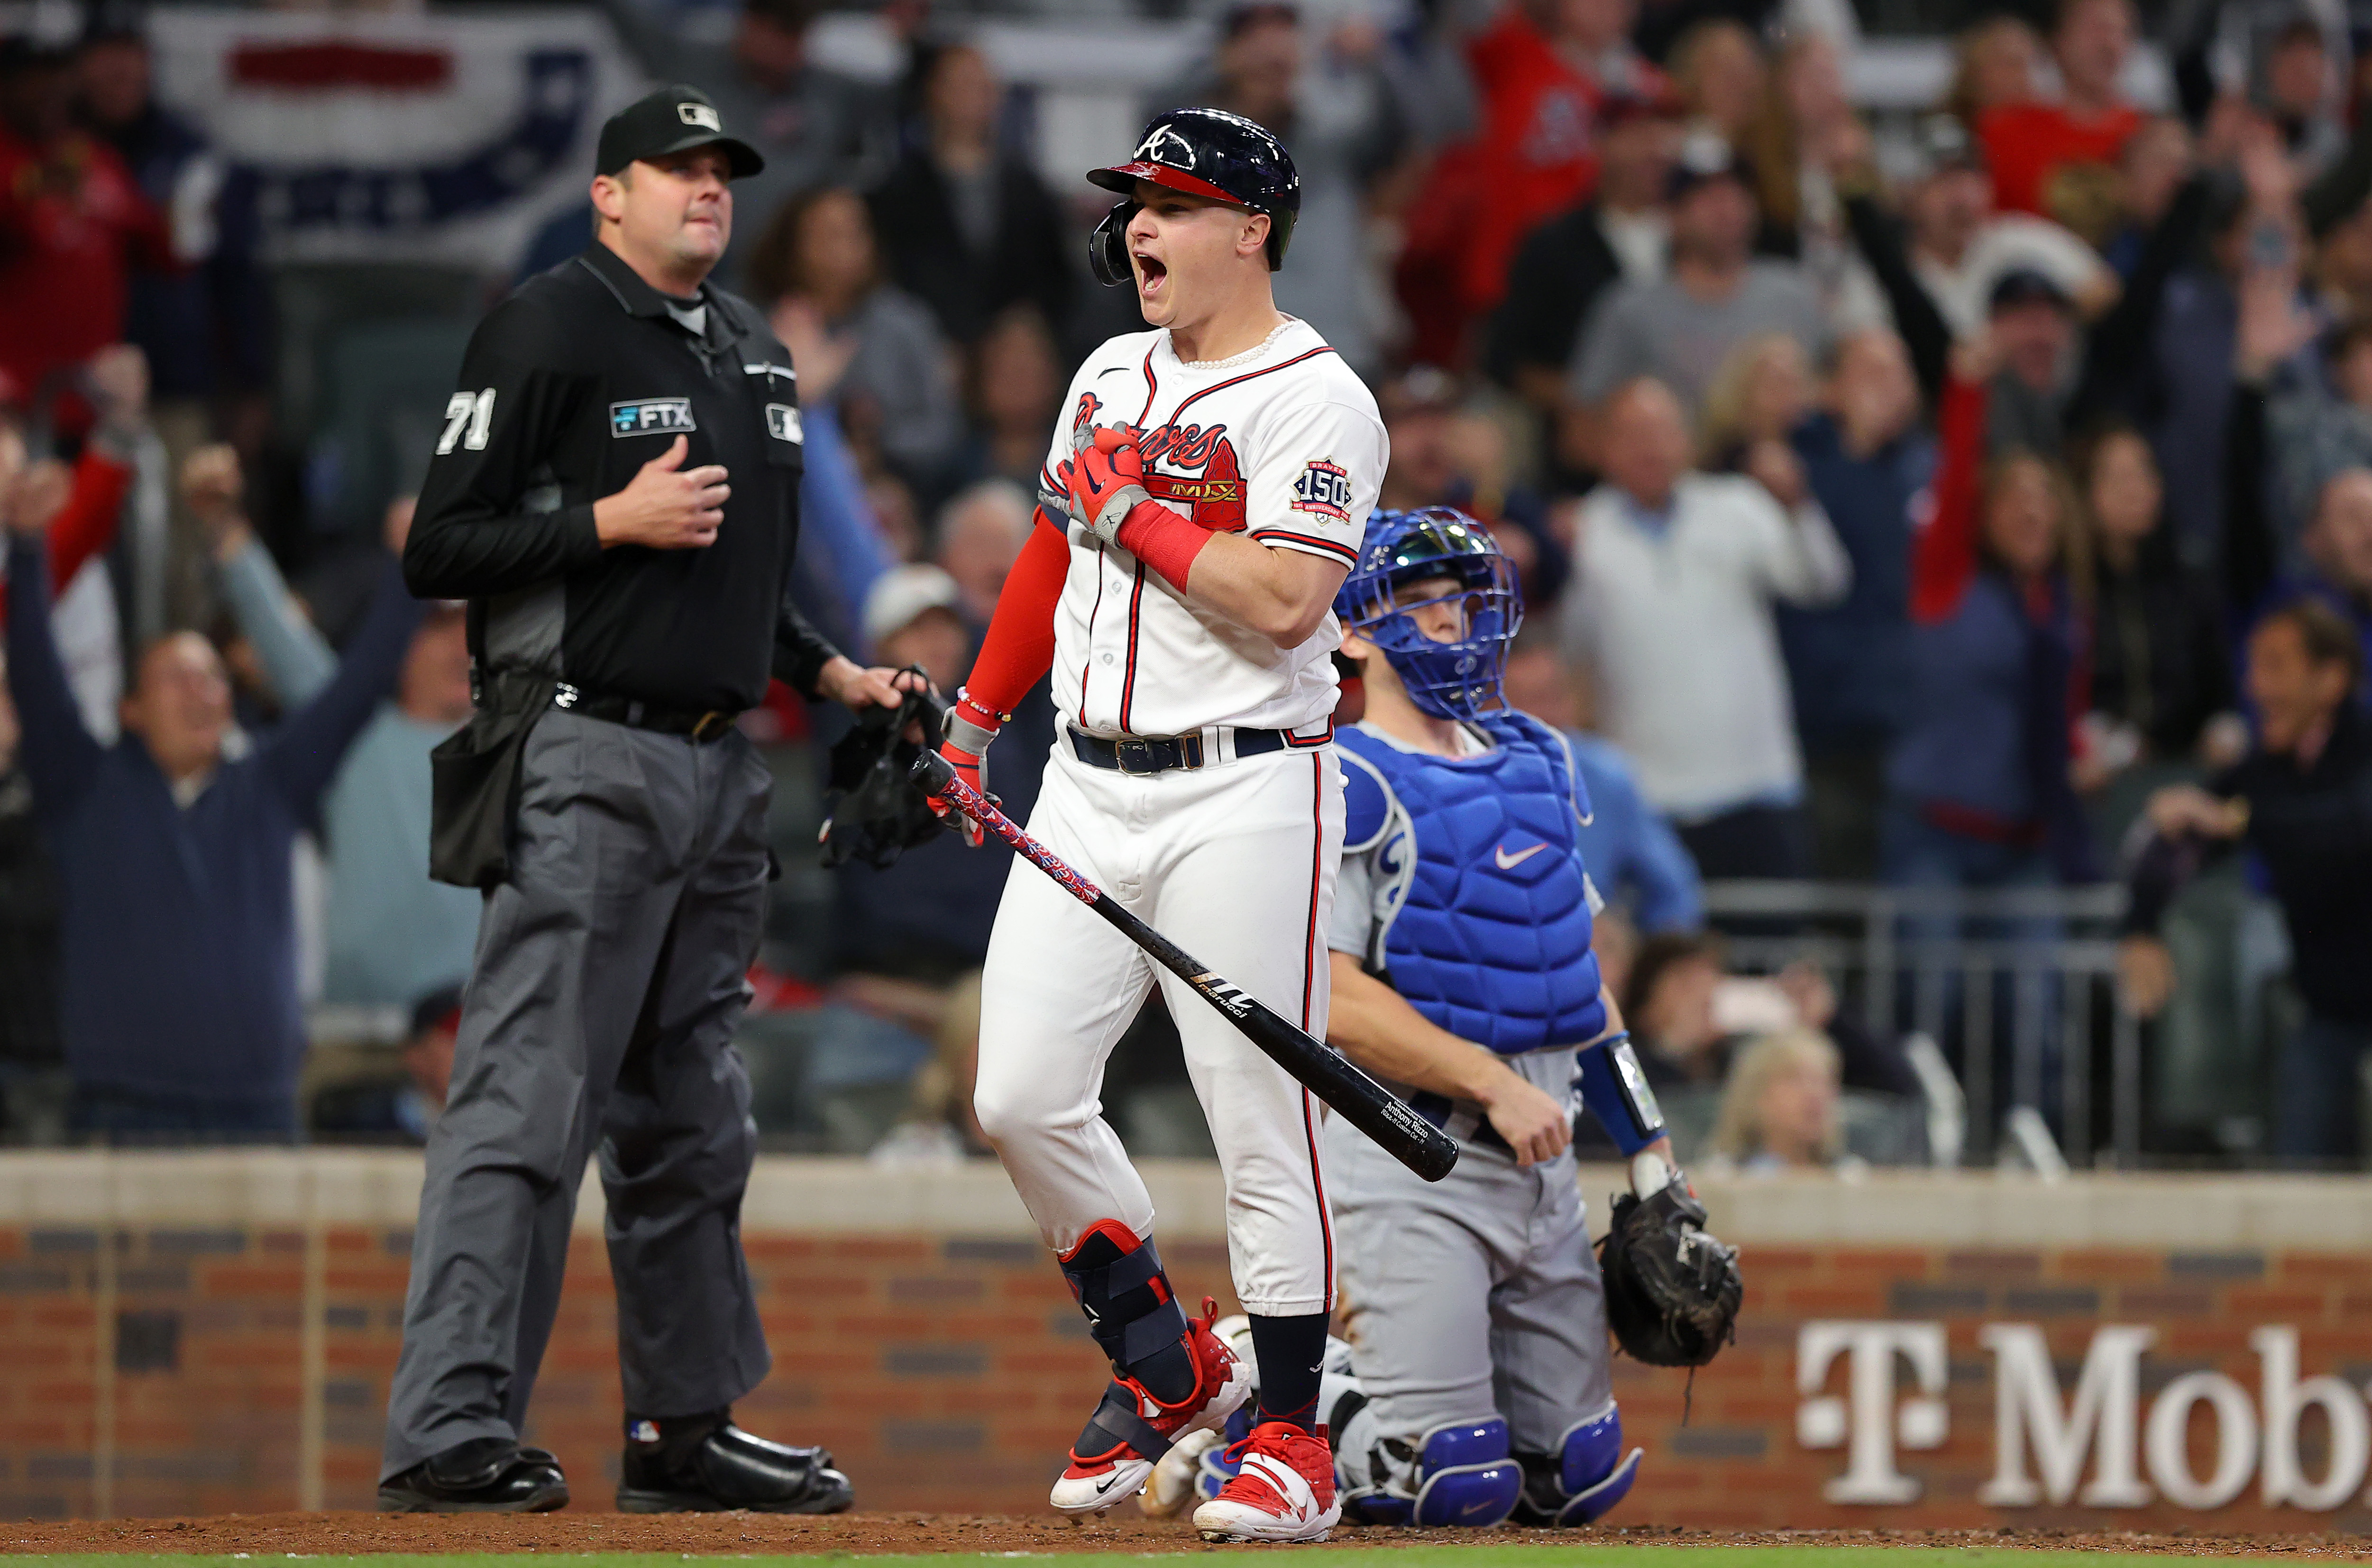 The Braves' Joc Pederson and his pearls are having a moment